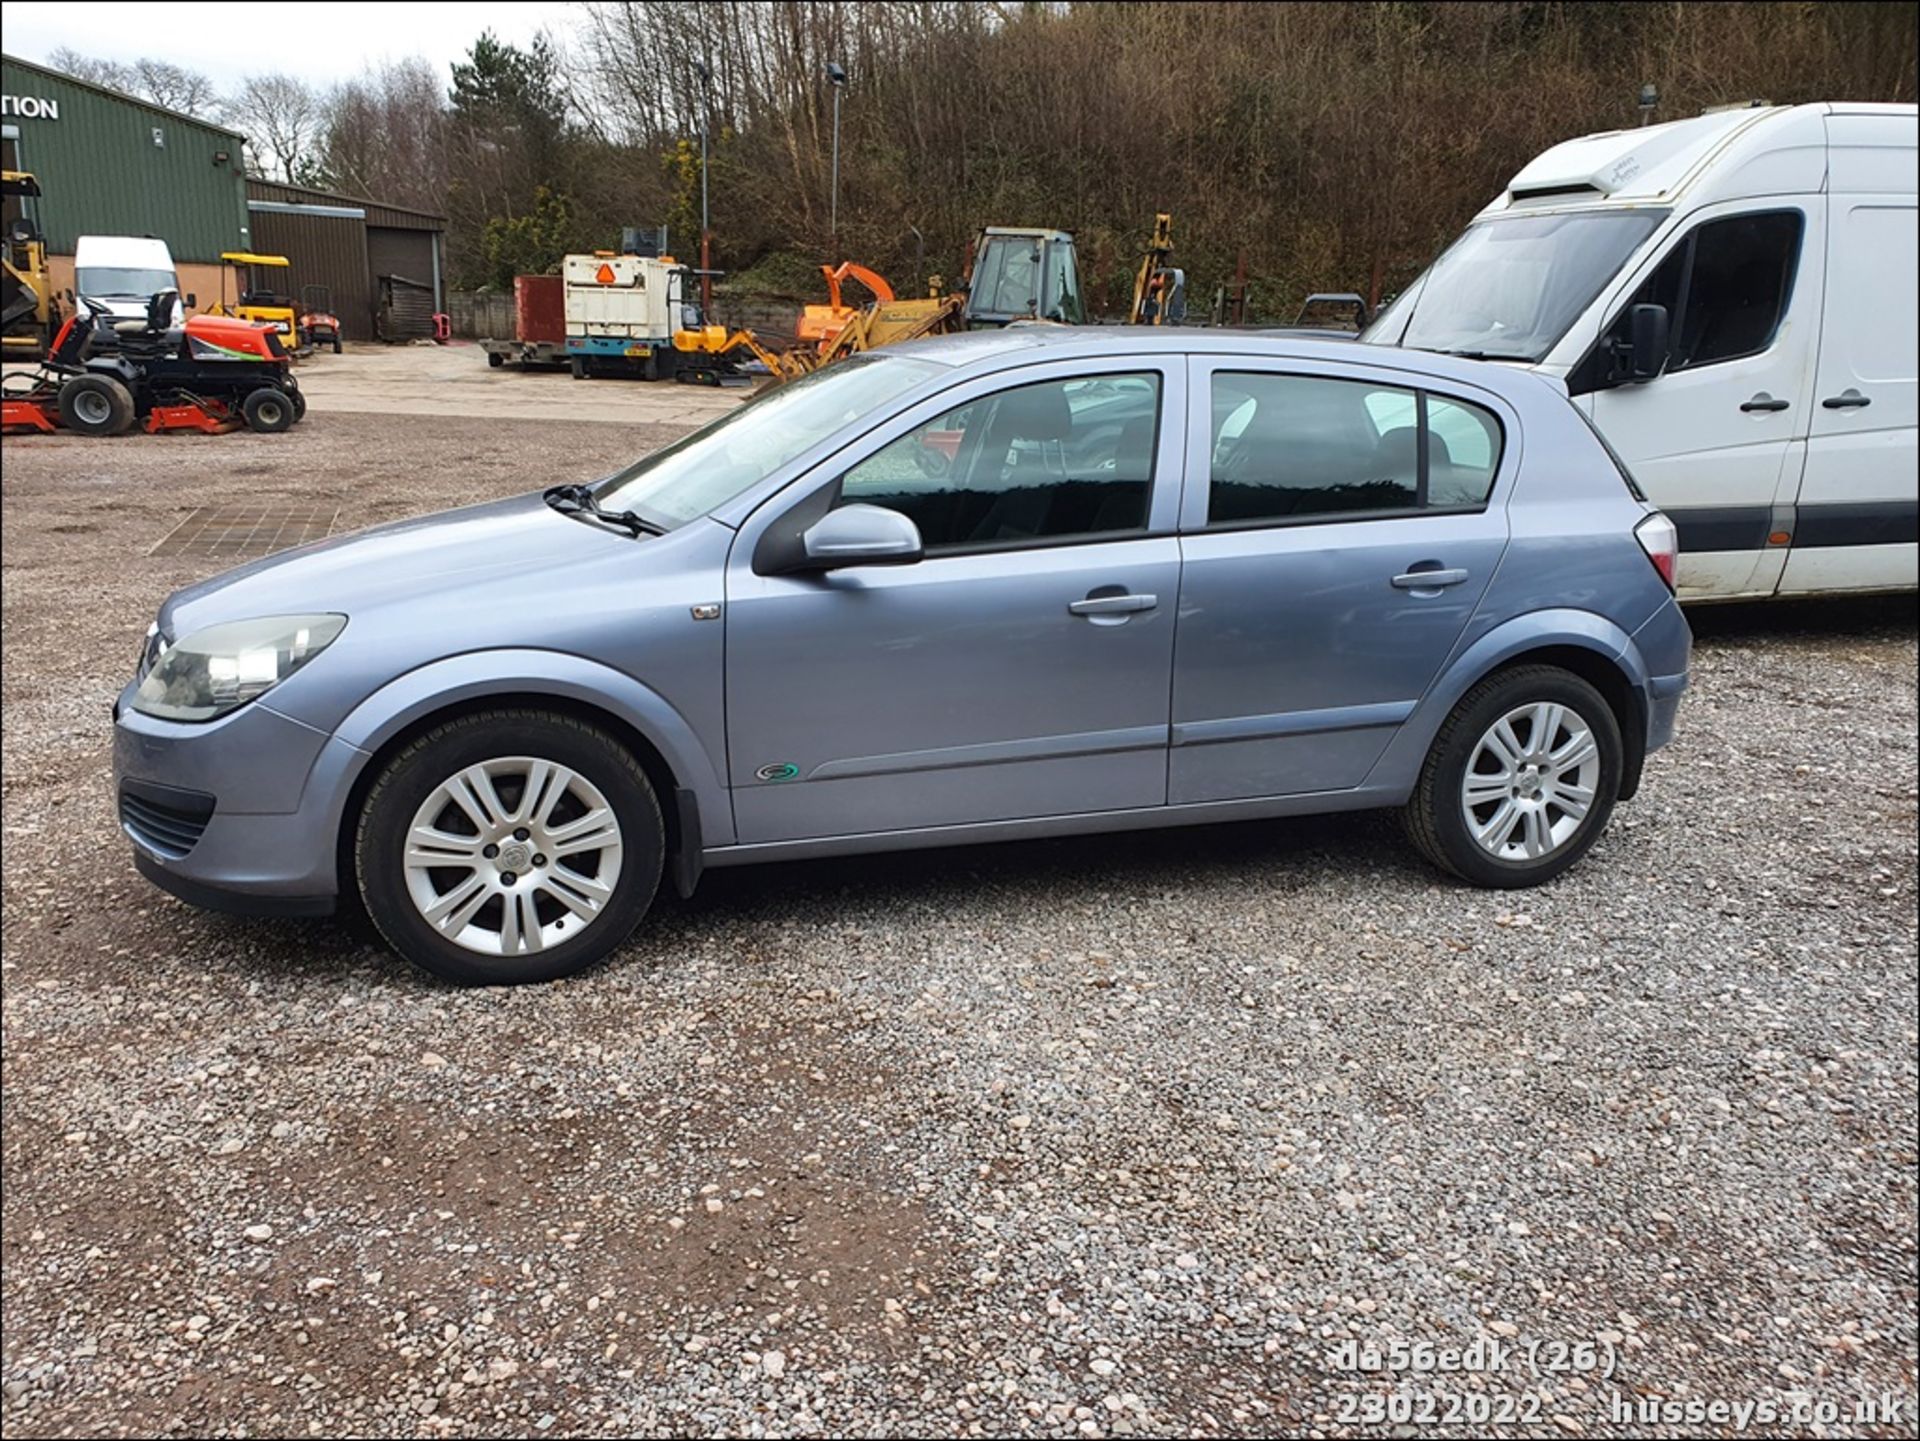 06/56 VAUXHALL ASTRA ACTIVE - 1598cc 5dr Hatchback (Silver) - Image 24 of 42